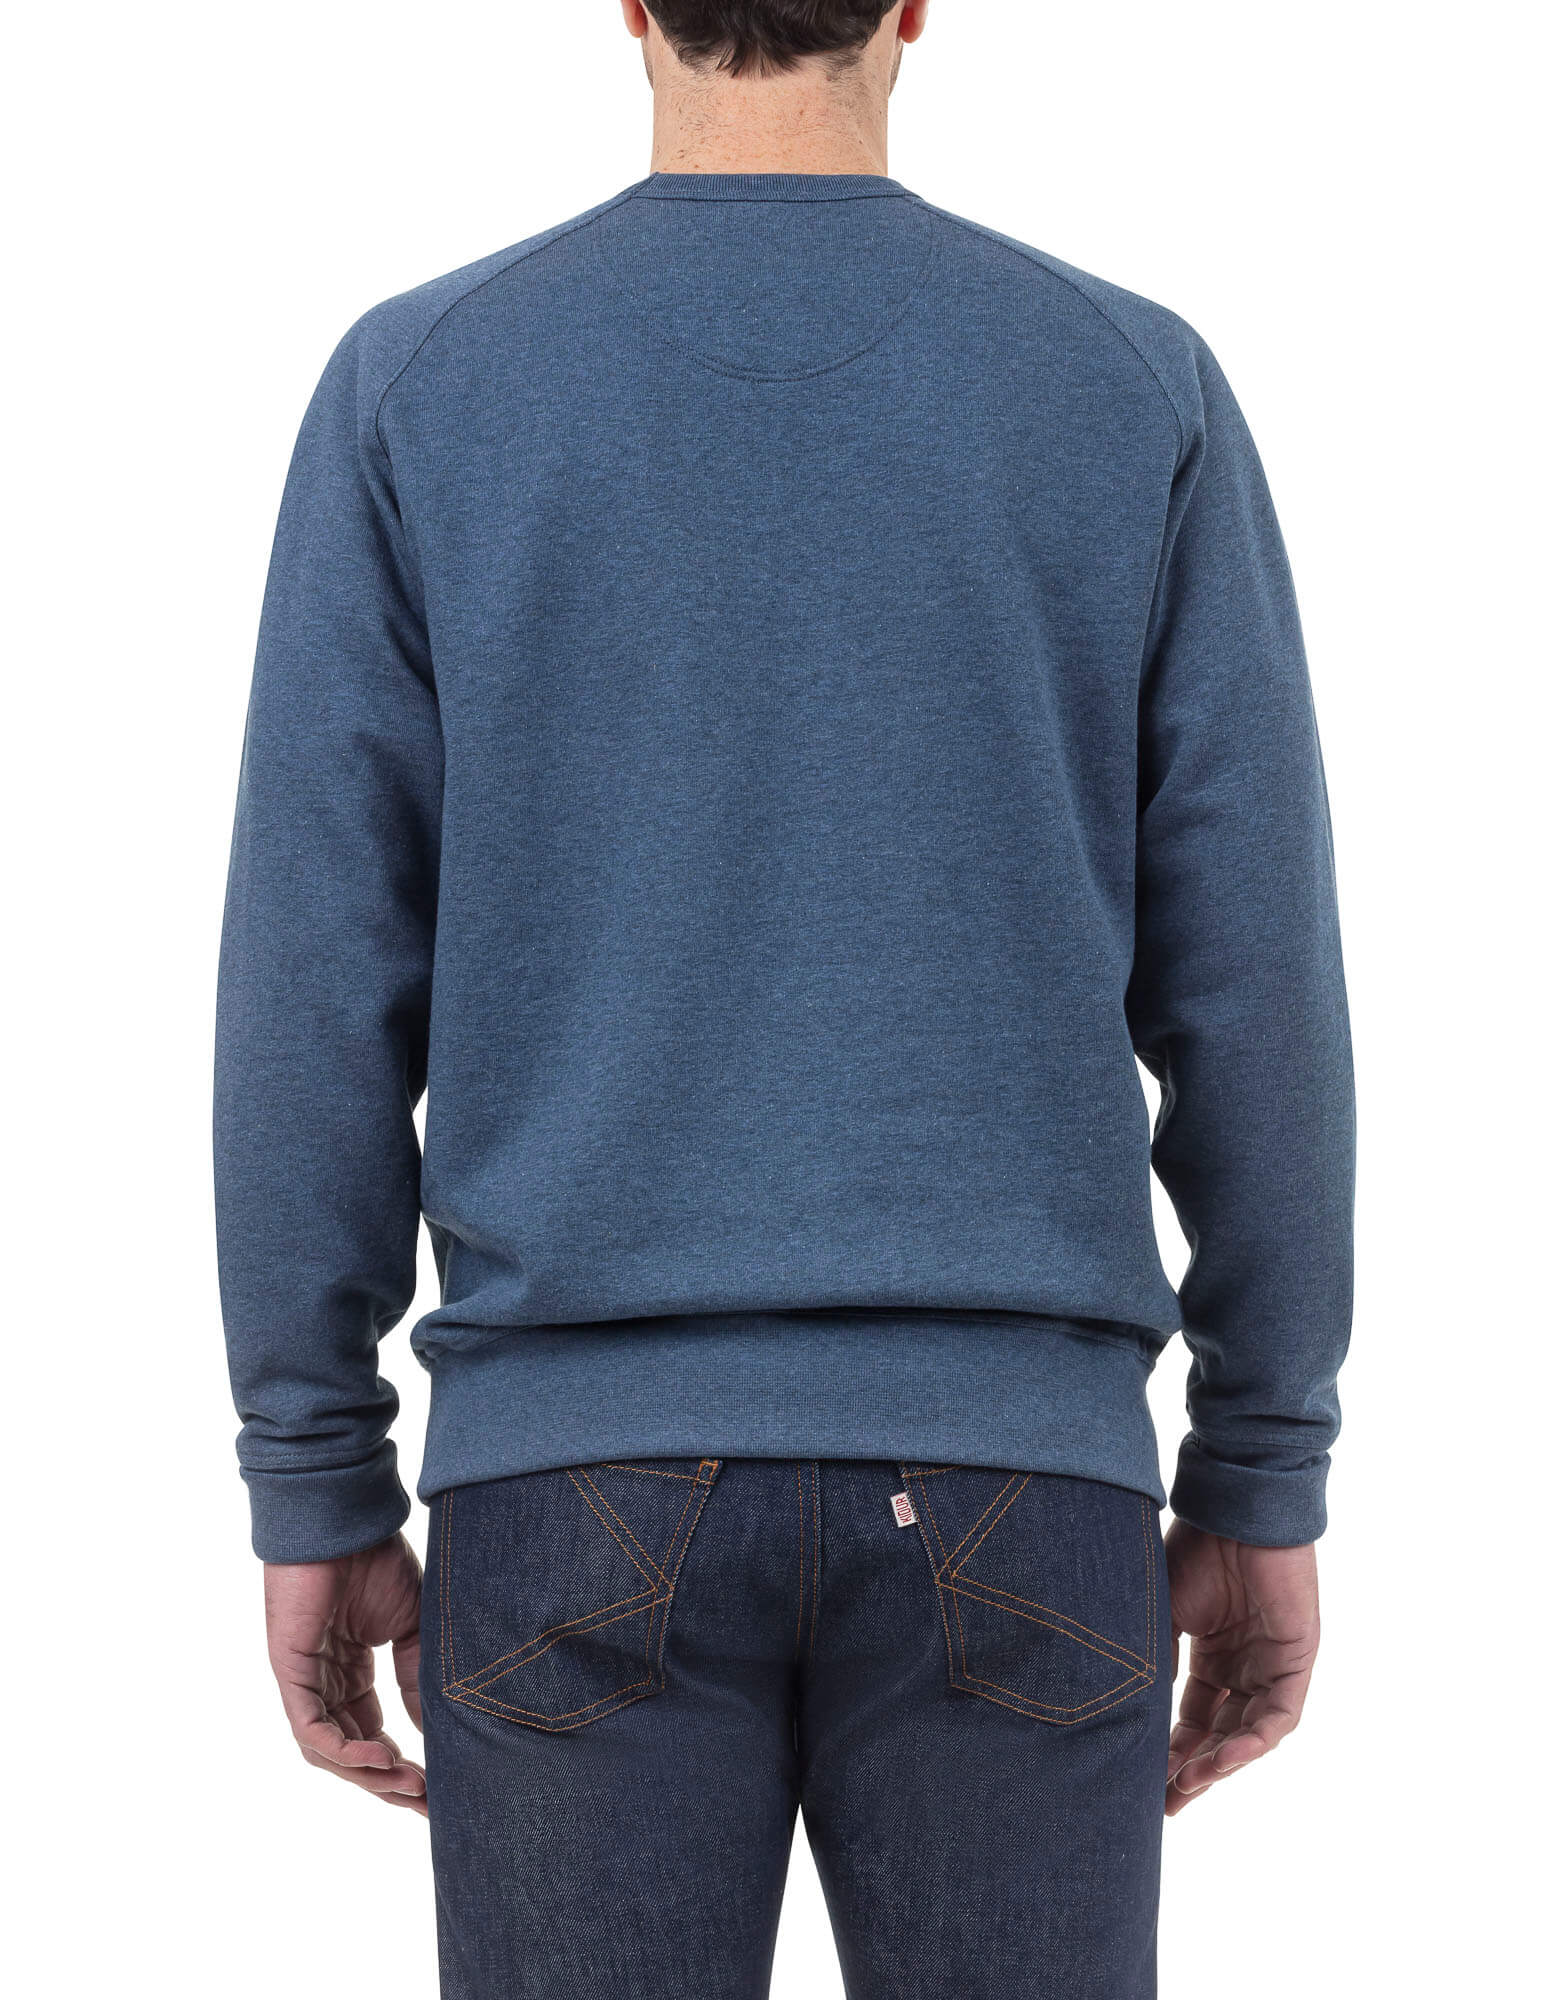 Crew Neck Berbere made in France pull sweat